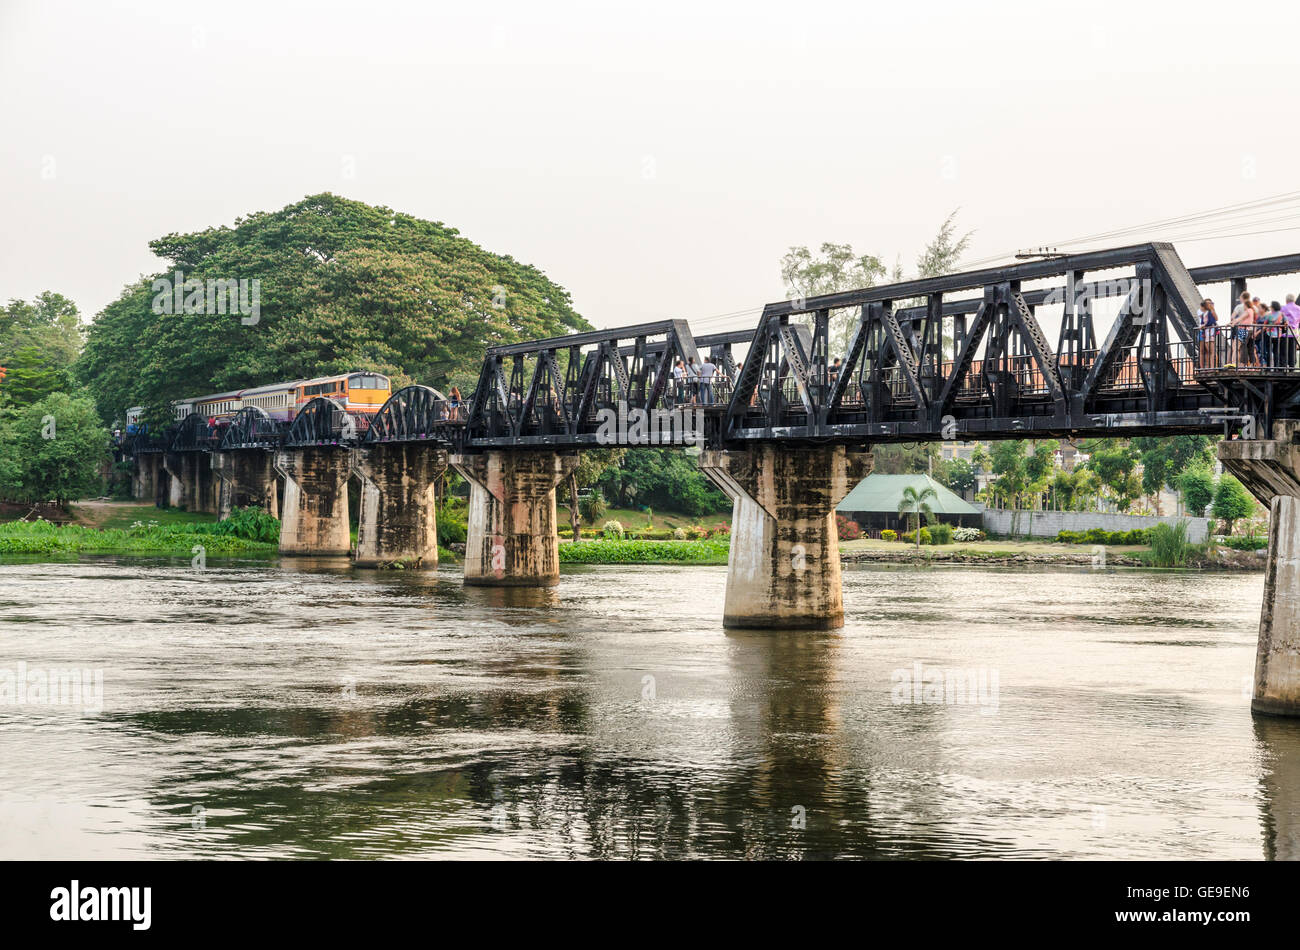 Trains for travel running on the old bridge over the River Kwai Yai is a historical attractions during World War 2 the famous of Stock Photo